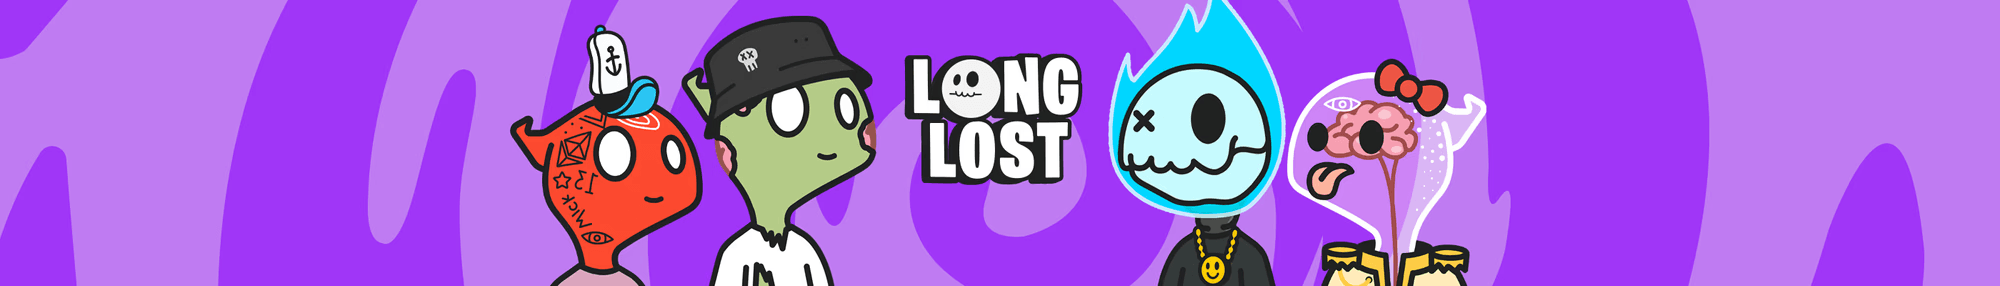 LongLost_Stock banner